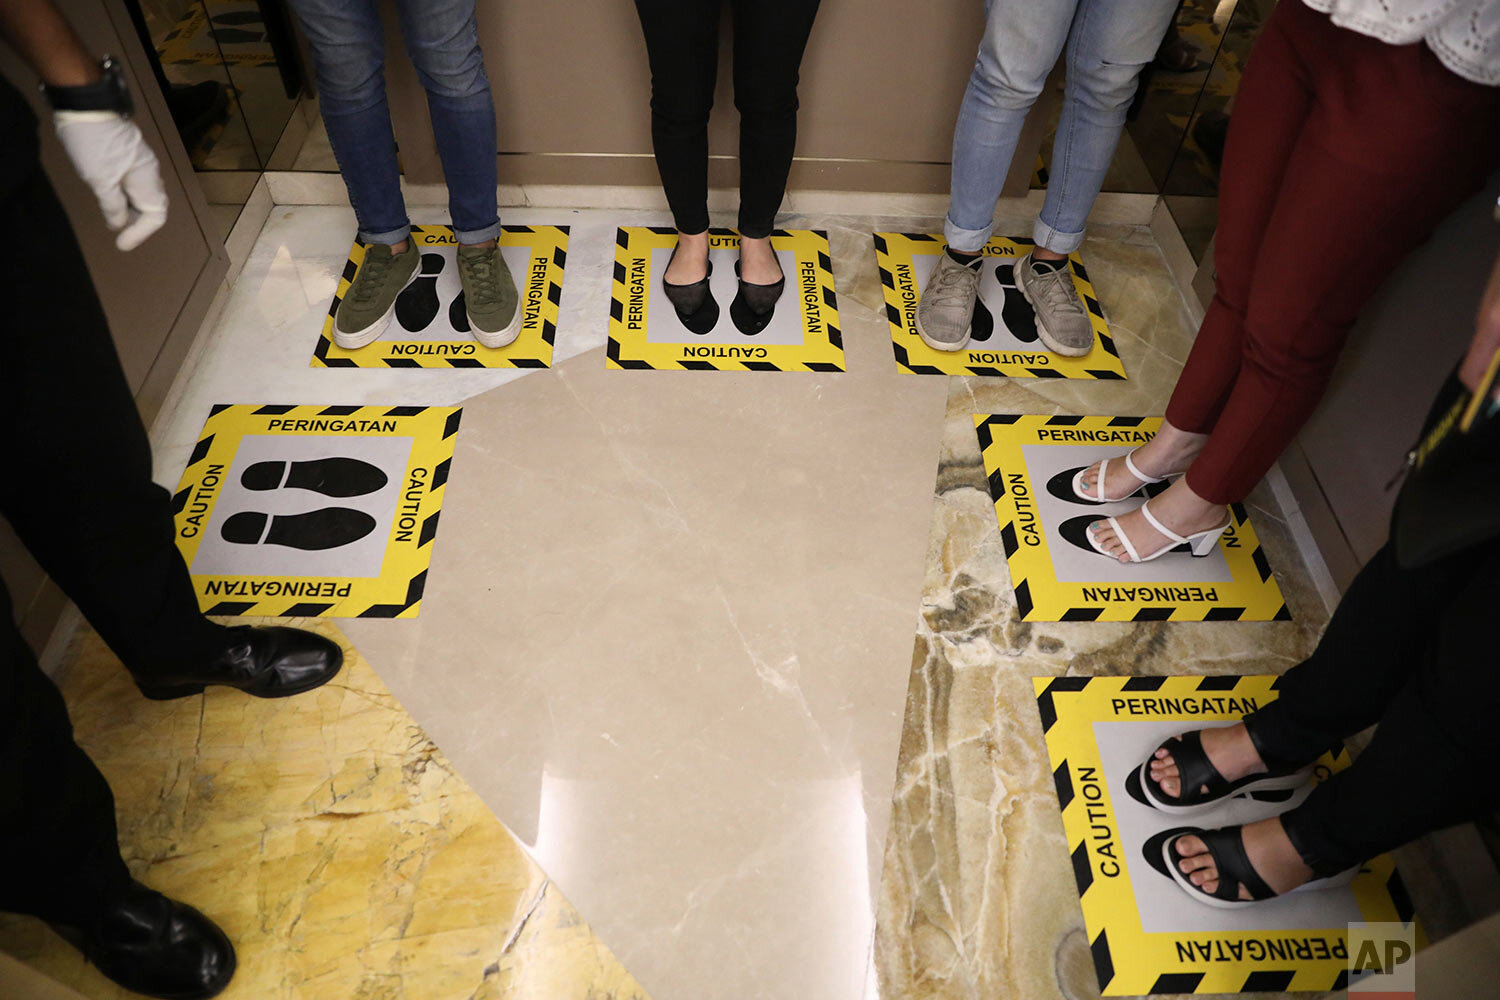  People stand in designated areas on the floor of an elevator as a social distancing effort to prevent the spread of the new coronavirus at a shopping mall in Surabaya, Indonesia, Thursday, March 19, 2020.  (AP Photo/Trisnadi) 